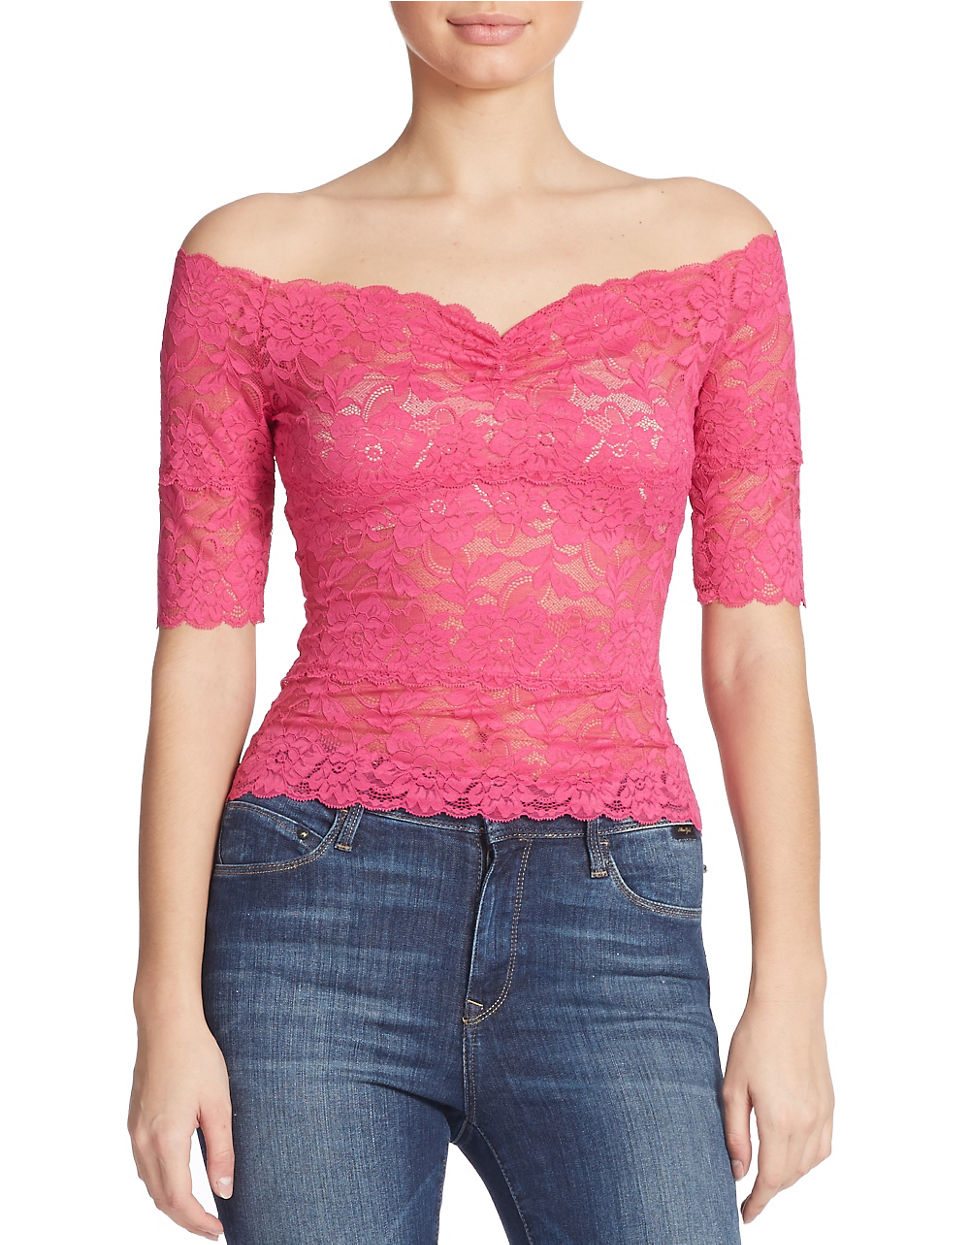 Lyst - Guess Off-the-shoulder Lace Top in Pink